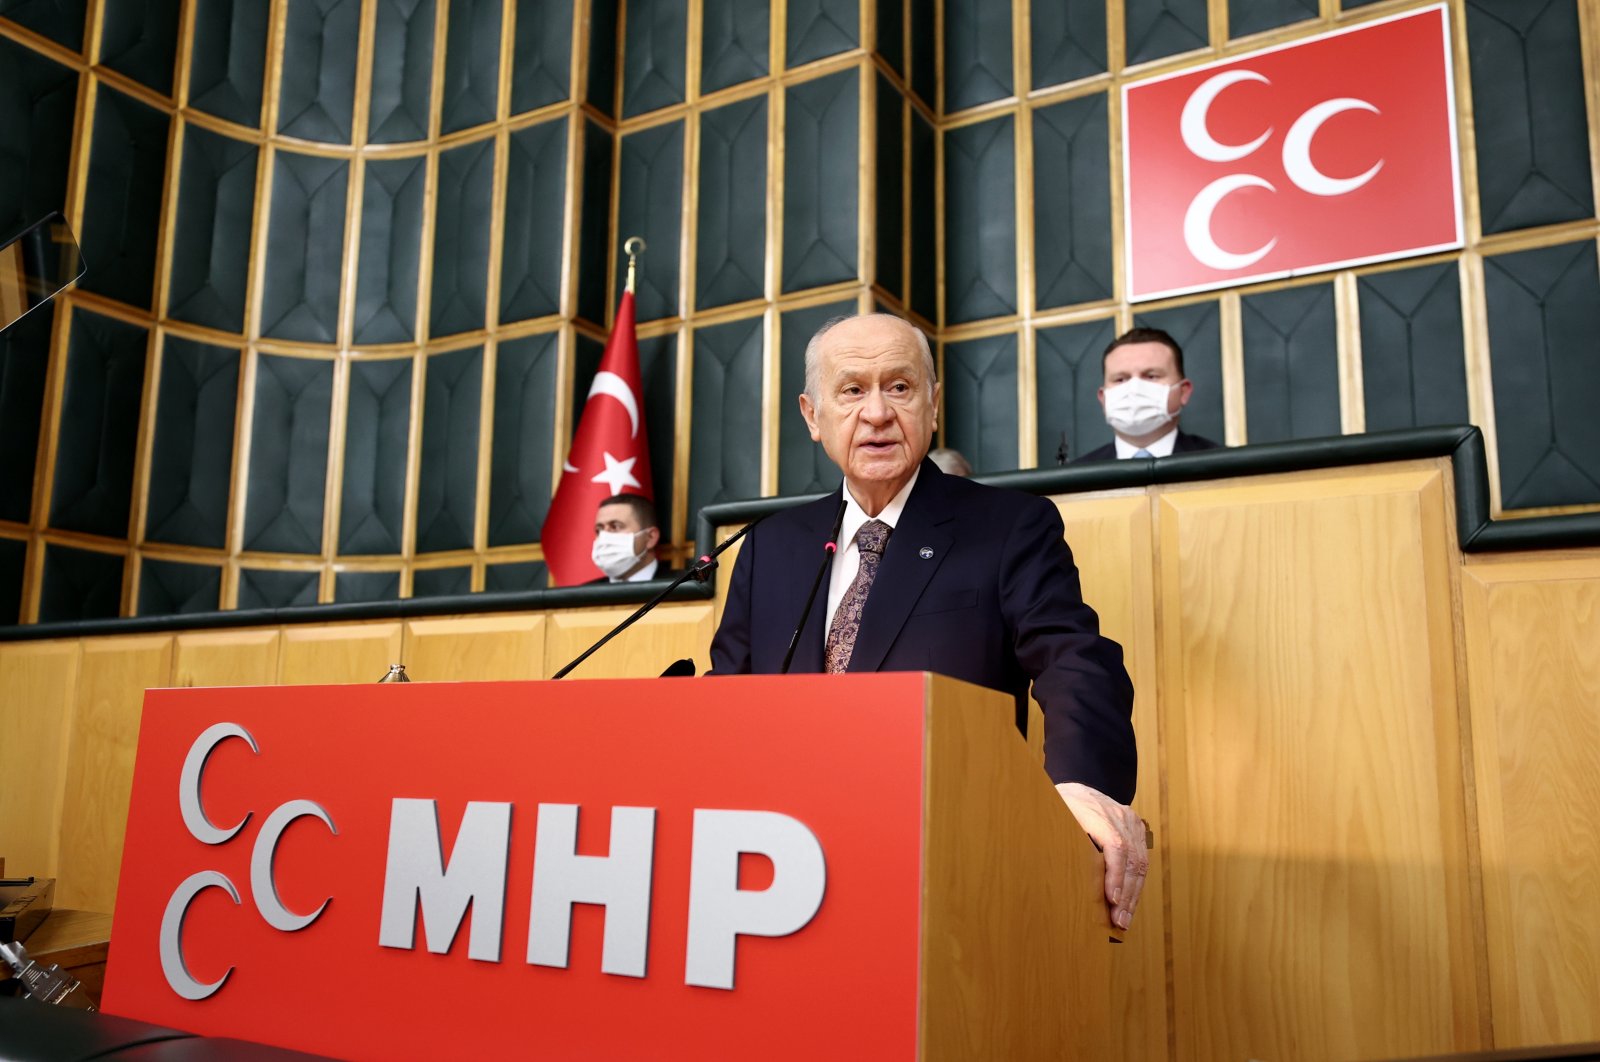 MHP Chairperson Devlet Bahçeli speaks at his party's parliamentary group meeting in Ankara, Turkey, Oct. 19, 2021. (AA Photo)